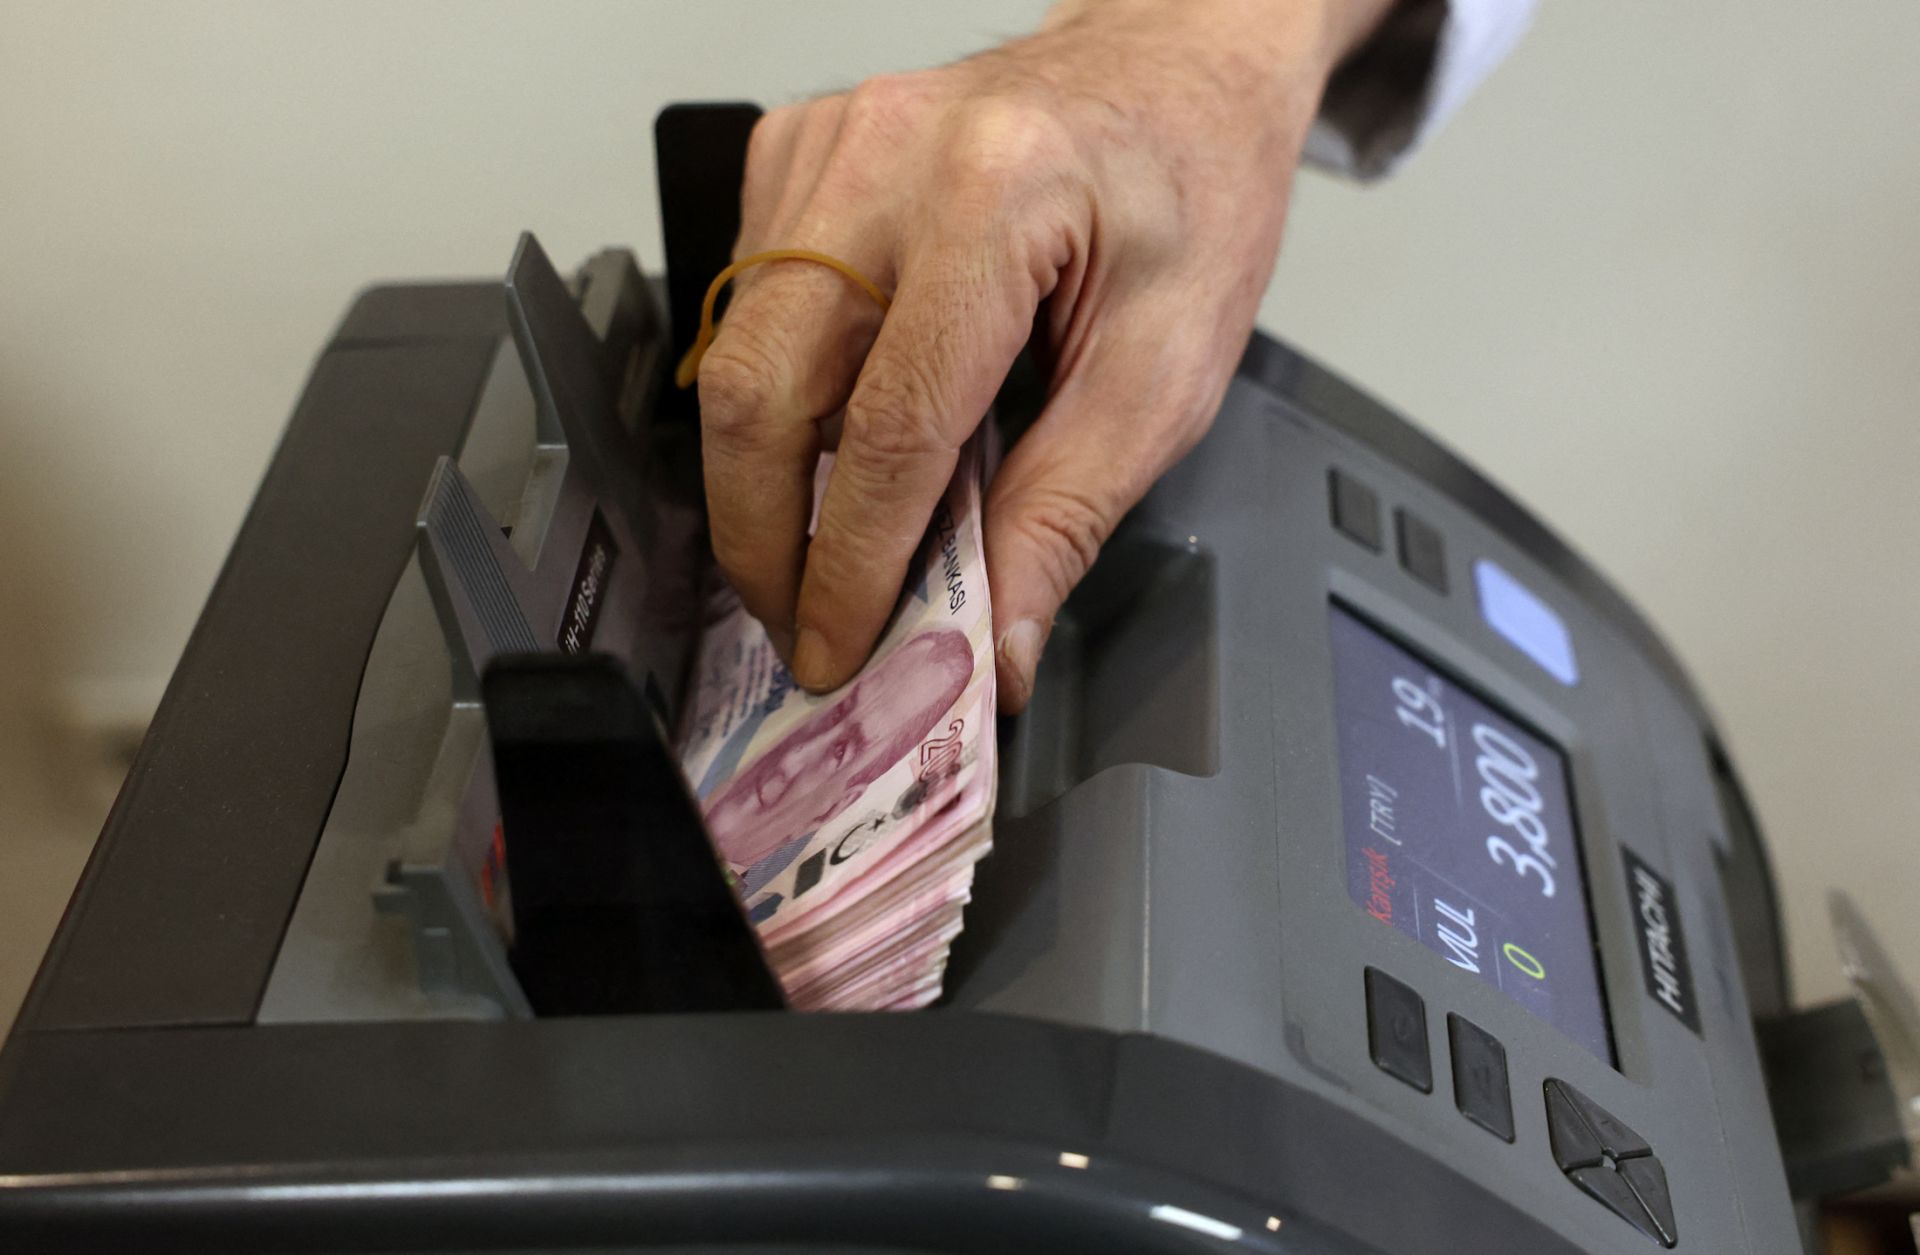 A teller uses a machine to count Turkish lira banknotes at a foreign exchange office in Ankara, Turkey, on July 20, 2023.